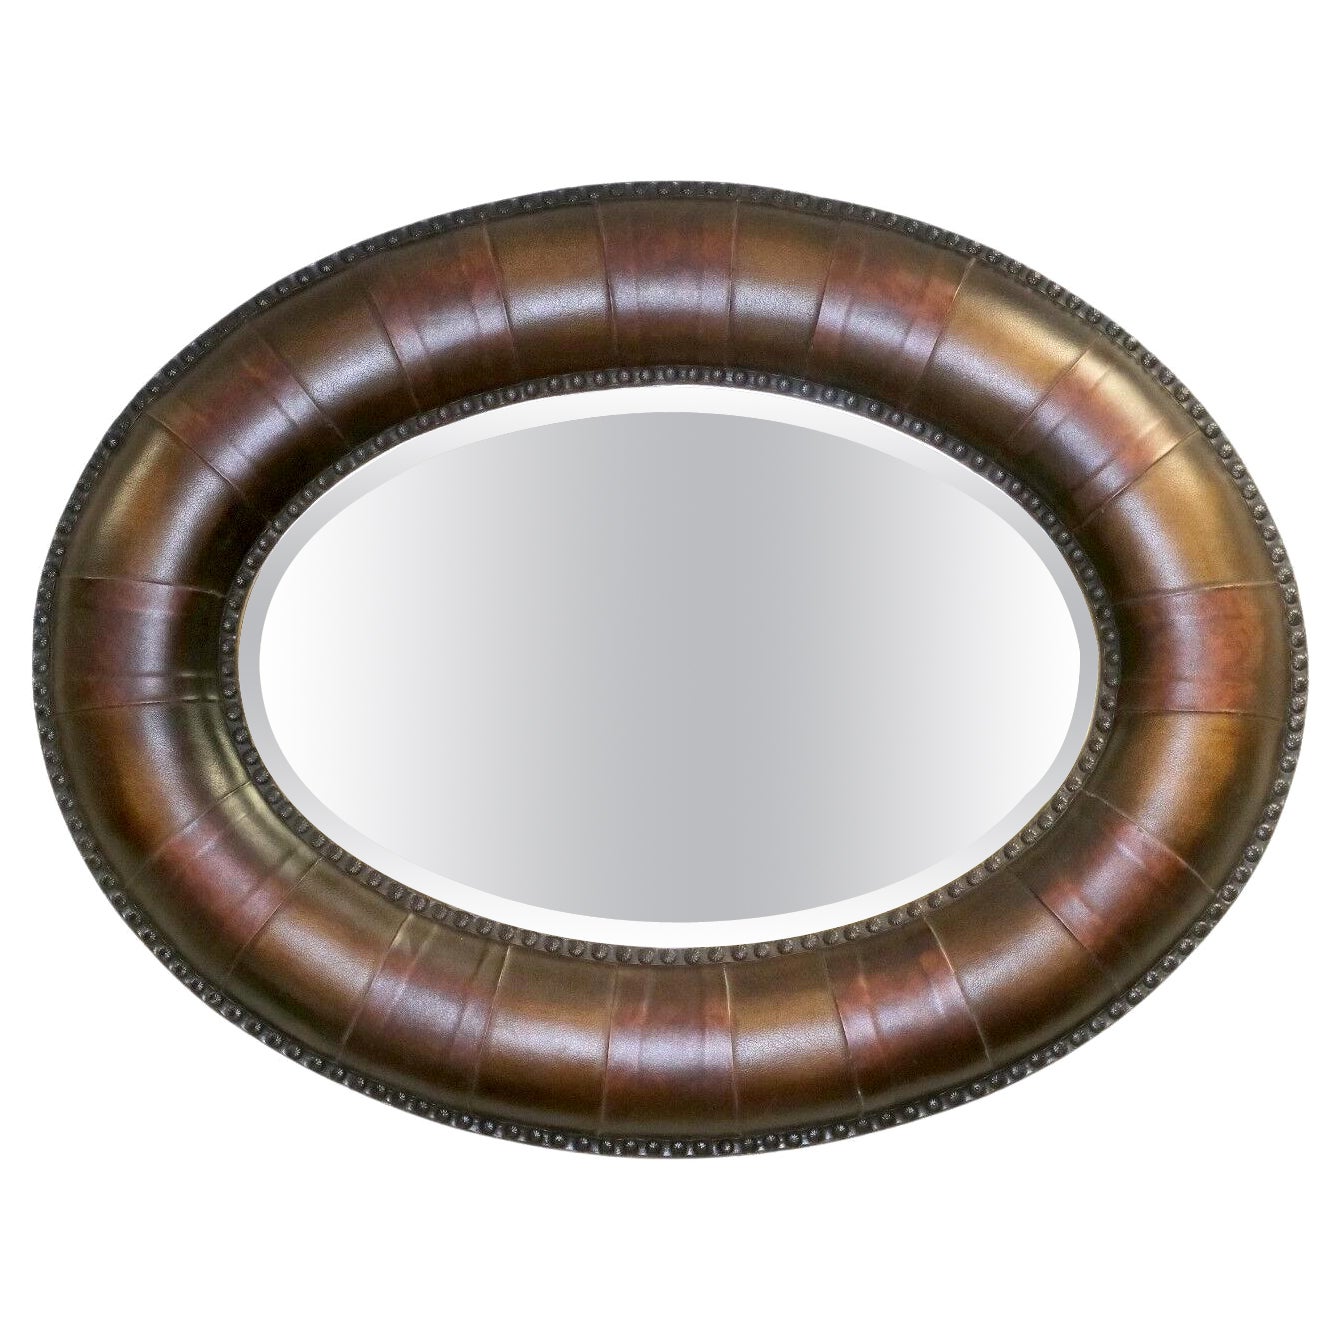 BEAUTIFUL DETAILED BROWN LEATHER OVAL STUDDED FRAME WALL MiRROR